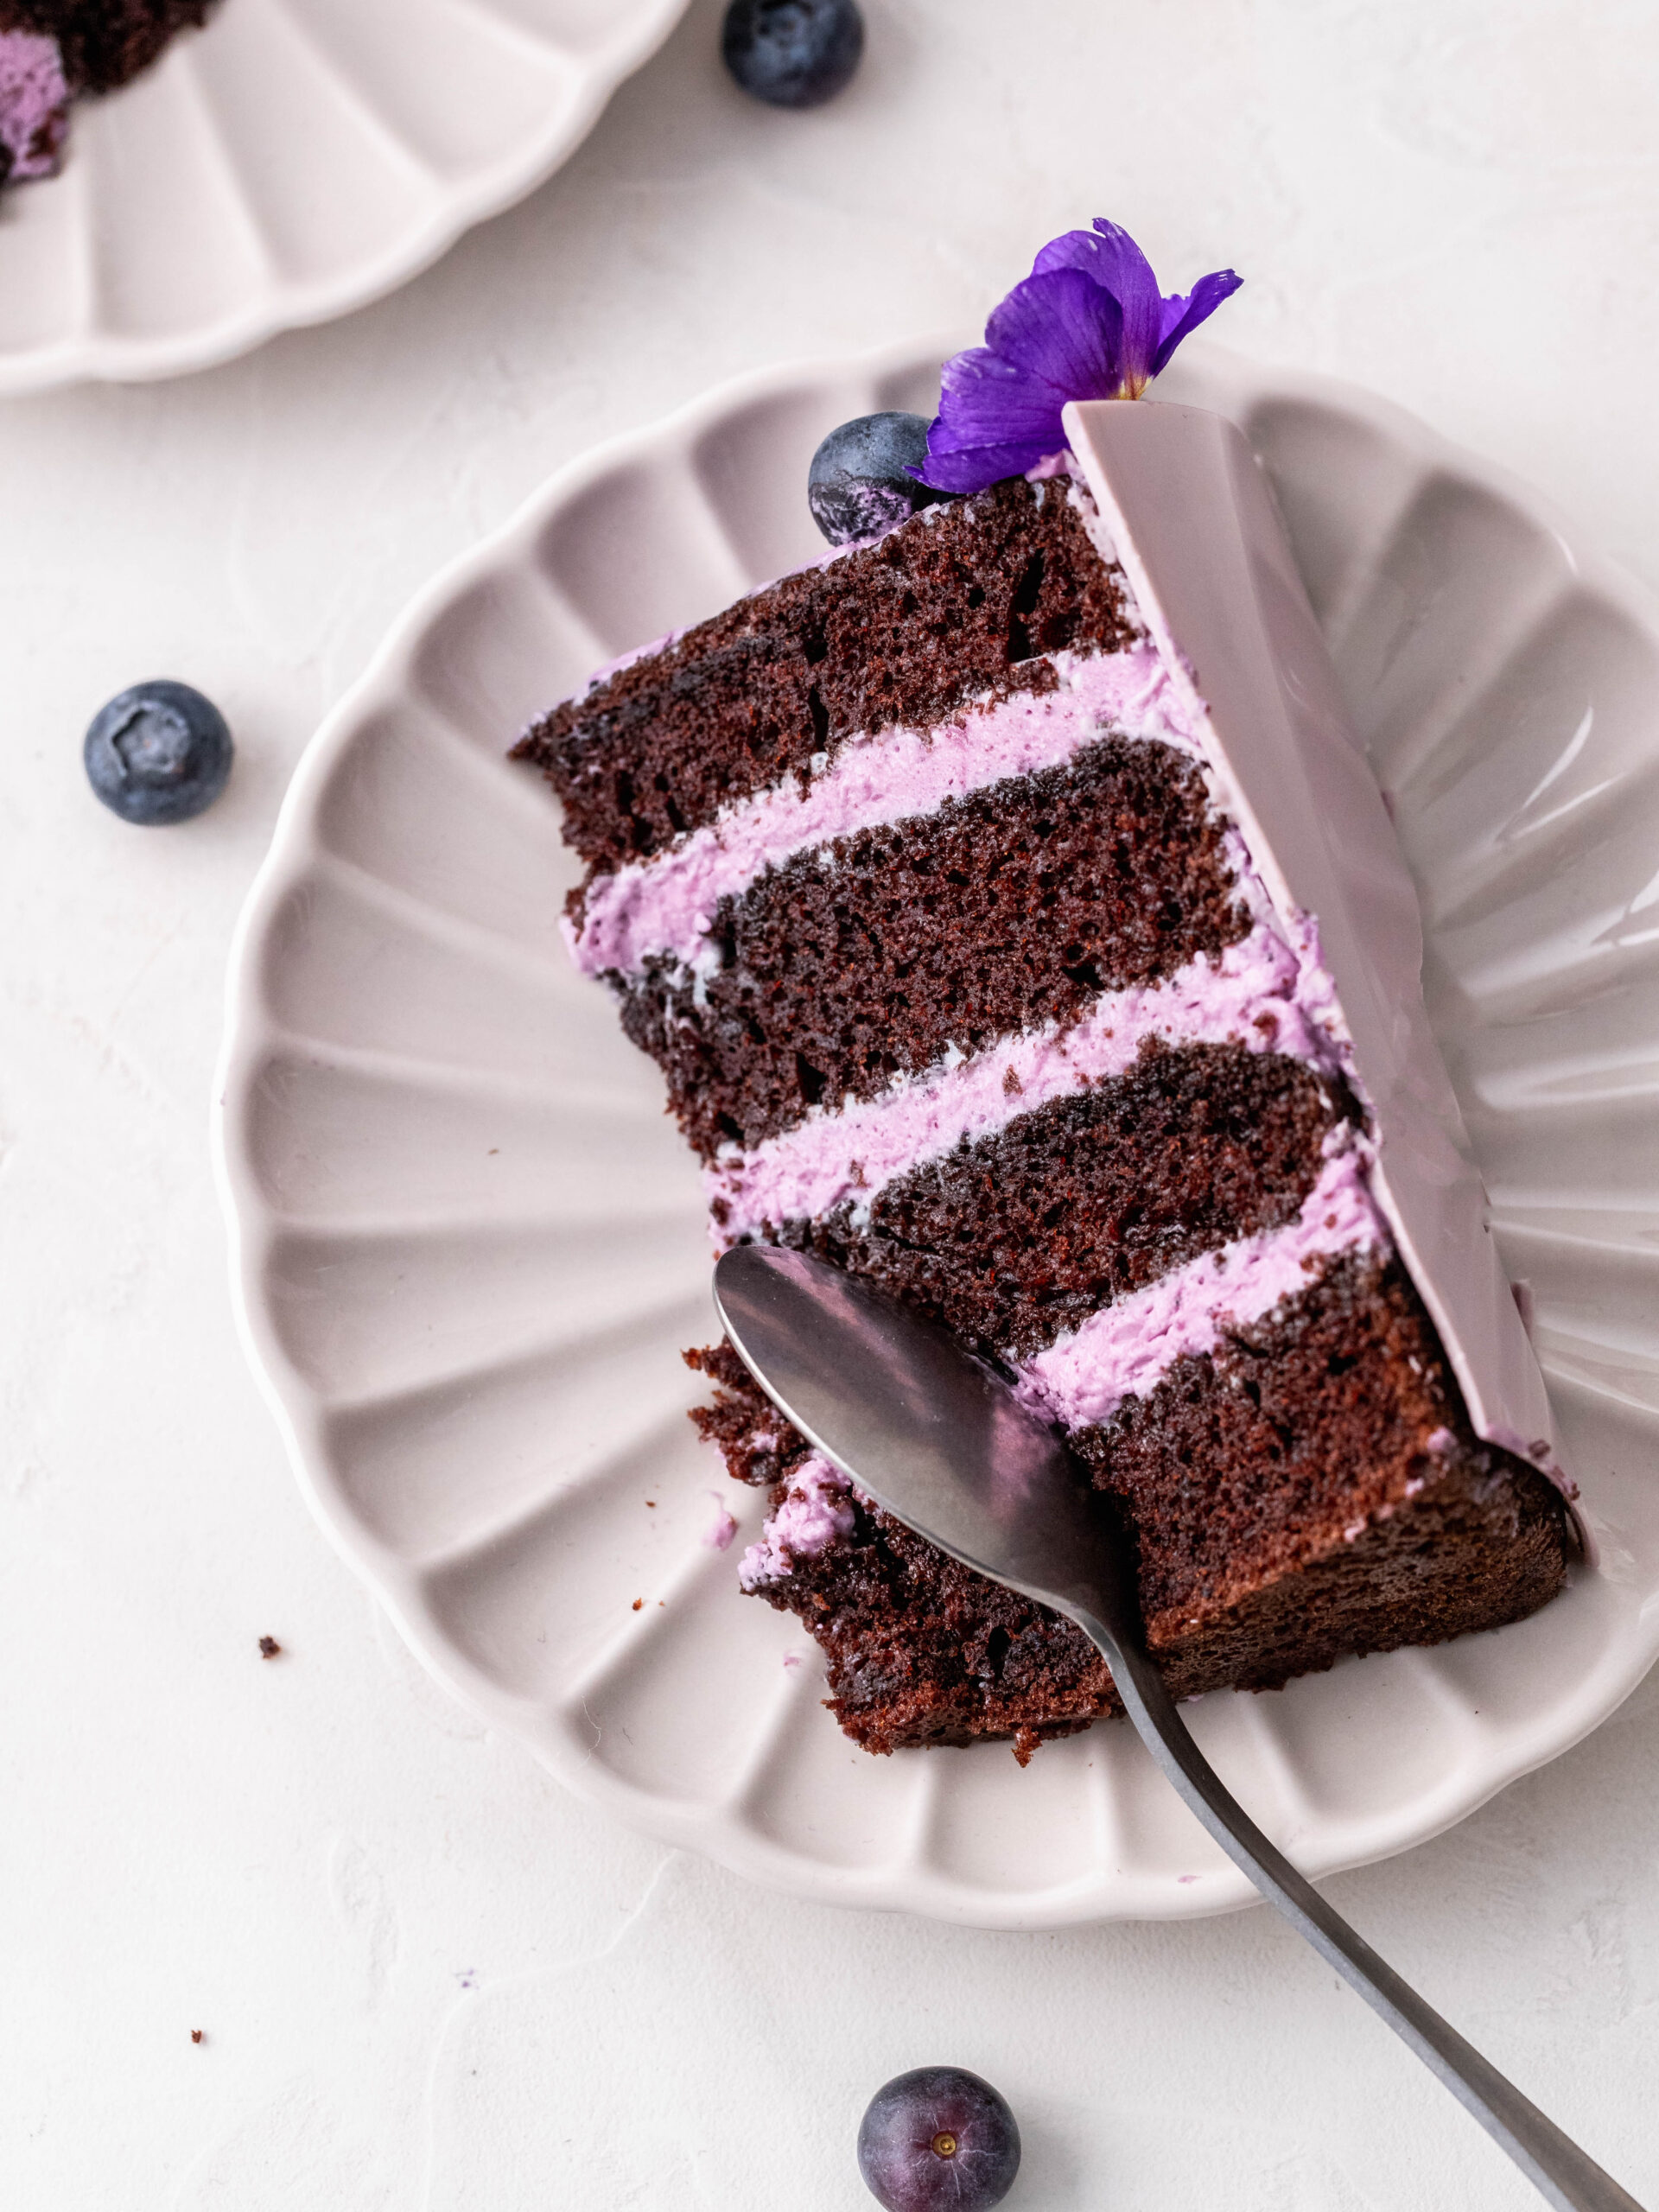 Blueberry Cream Cheese Chocolate Cake slice on a plate.